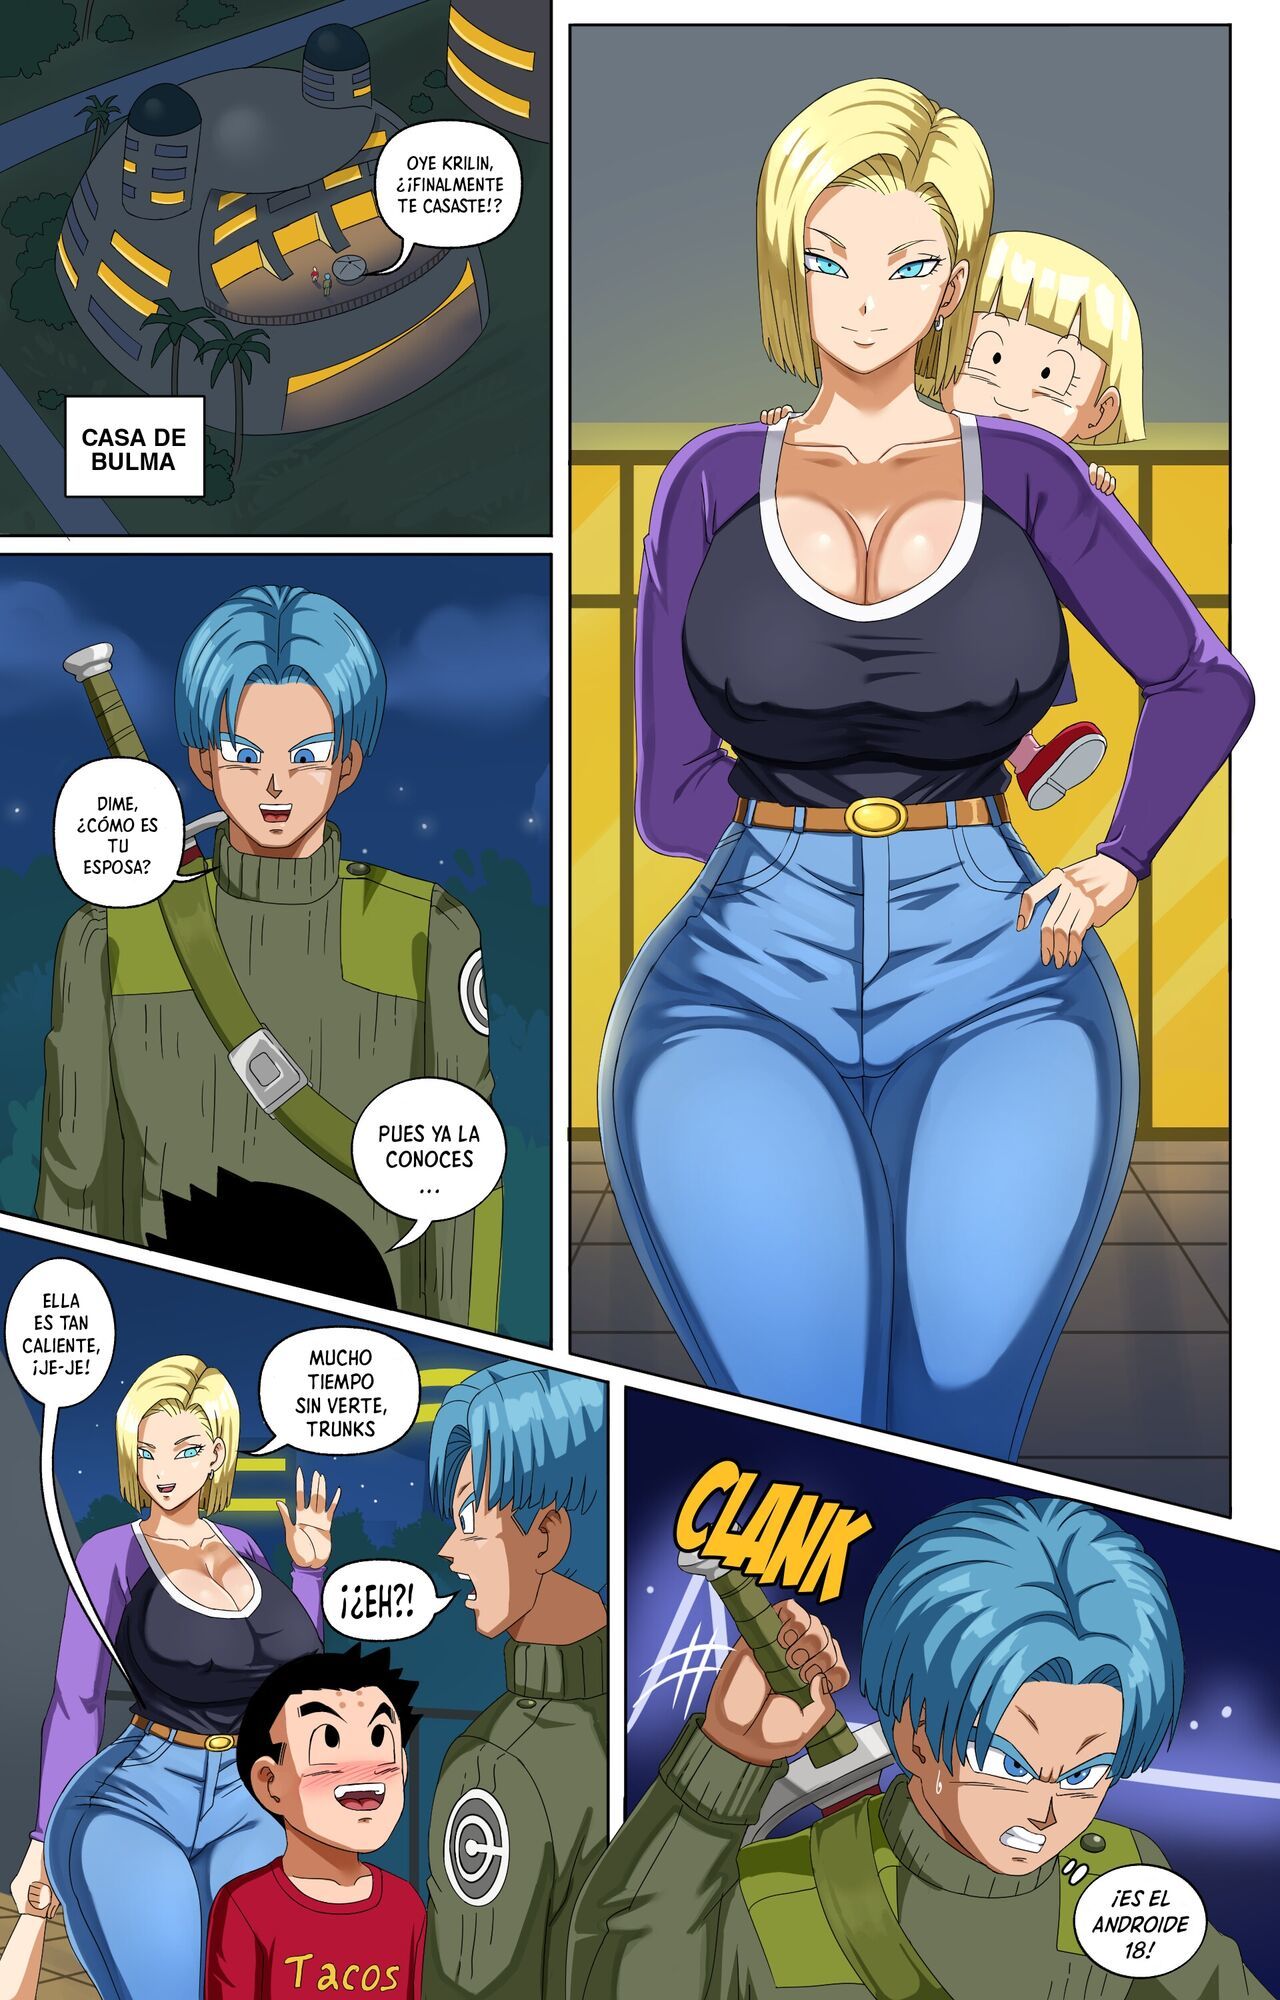 [Pink Pawg] Meeting Android 18 Yet Again Conociendo Al Androide 18 ¡Una Vez Más! (Dragon Ball Super) [Spanish] [Mister_Dark]